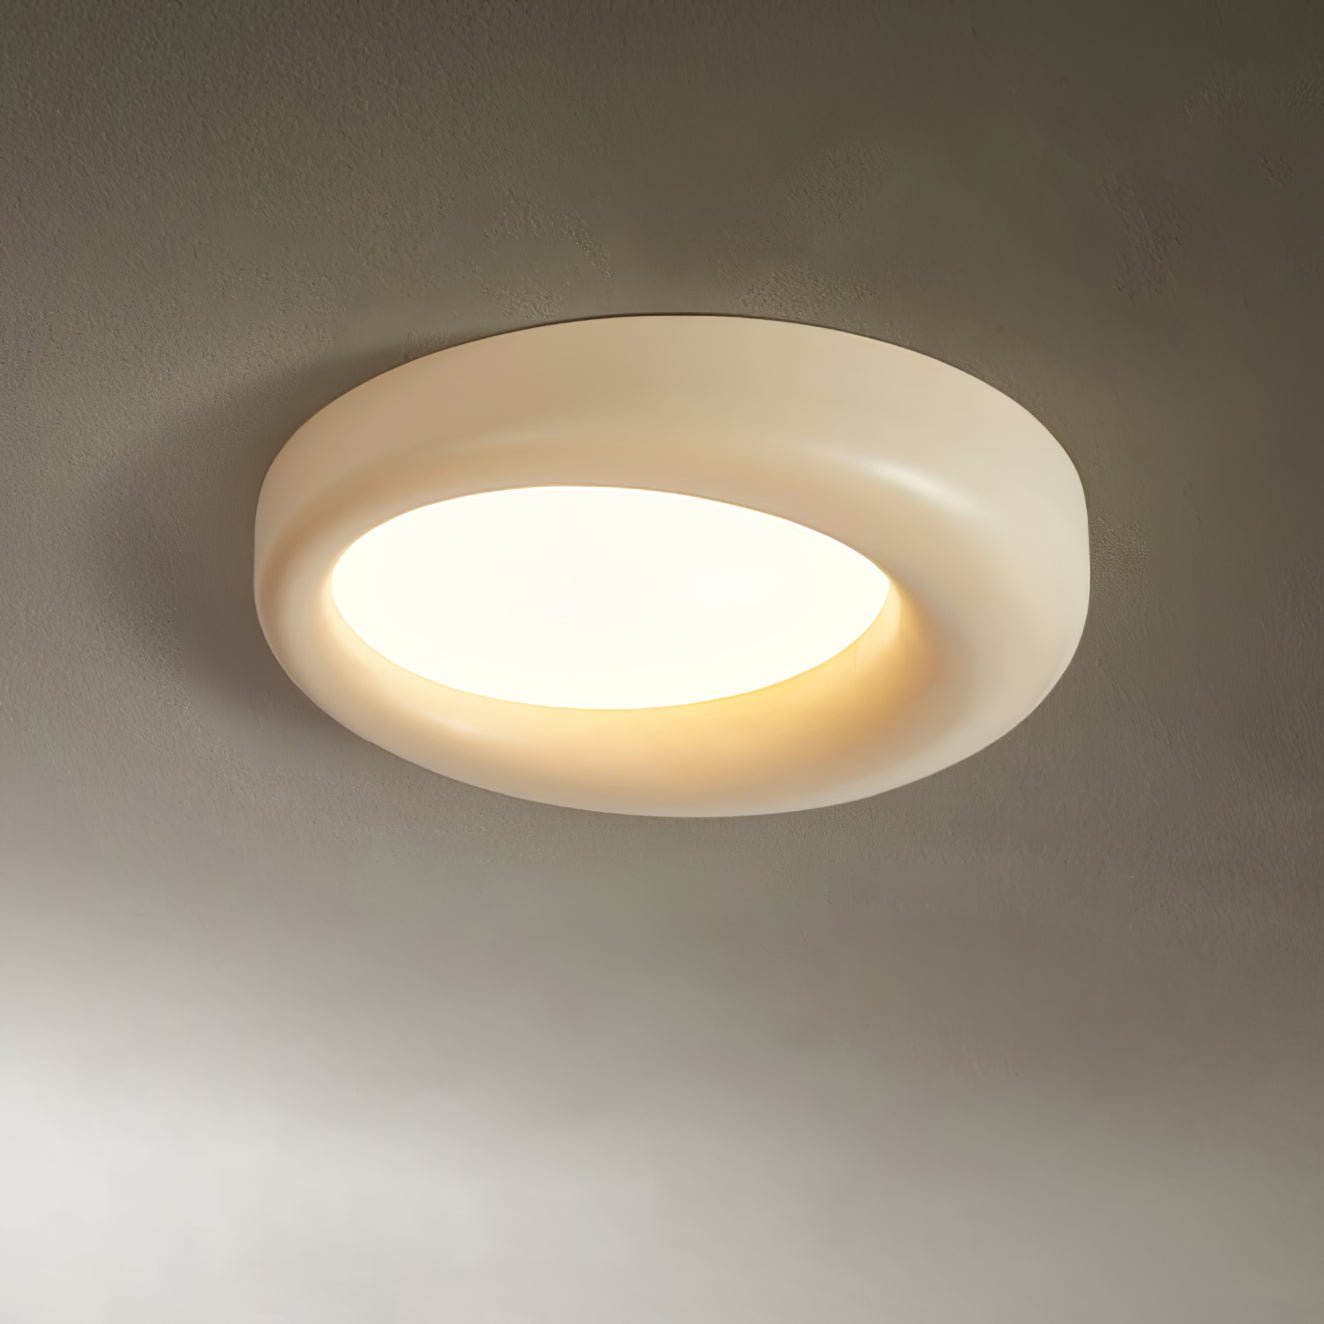 Zero Round Ceiling Lamp in Beige with Cool White Light, Dimensions: ∅ 28.3″ x H 7″ (72cm x 18cm)